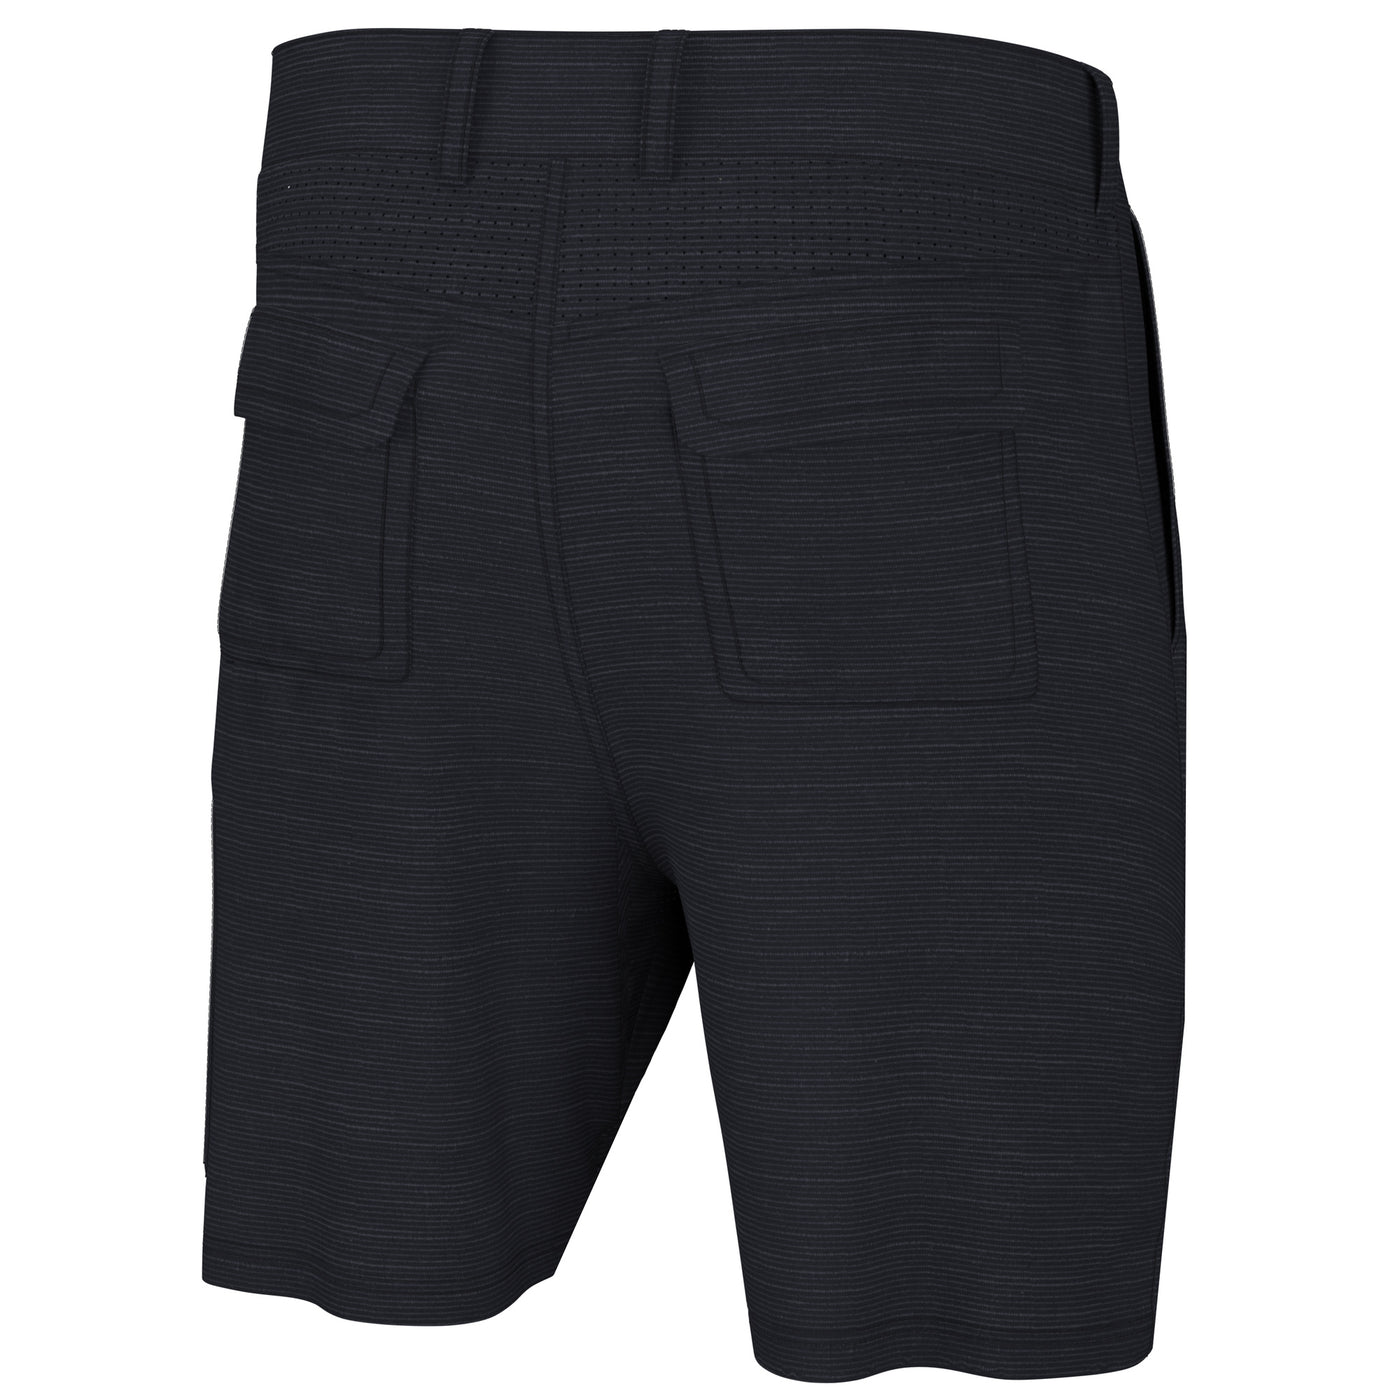 HUK Next Level 7in Charcoal Gray Short H2000040-010